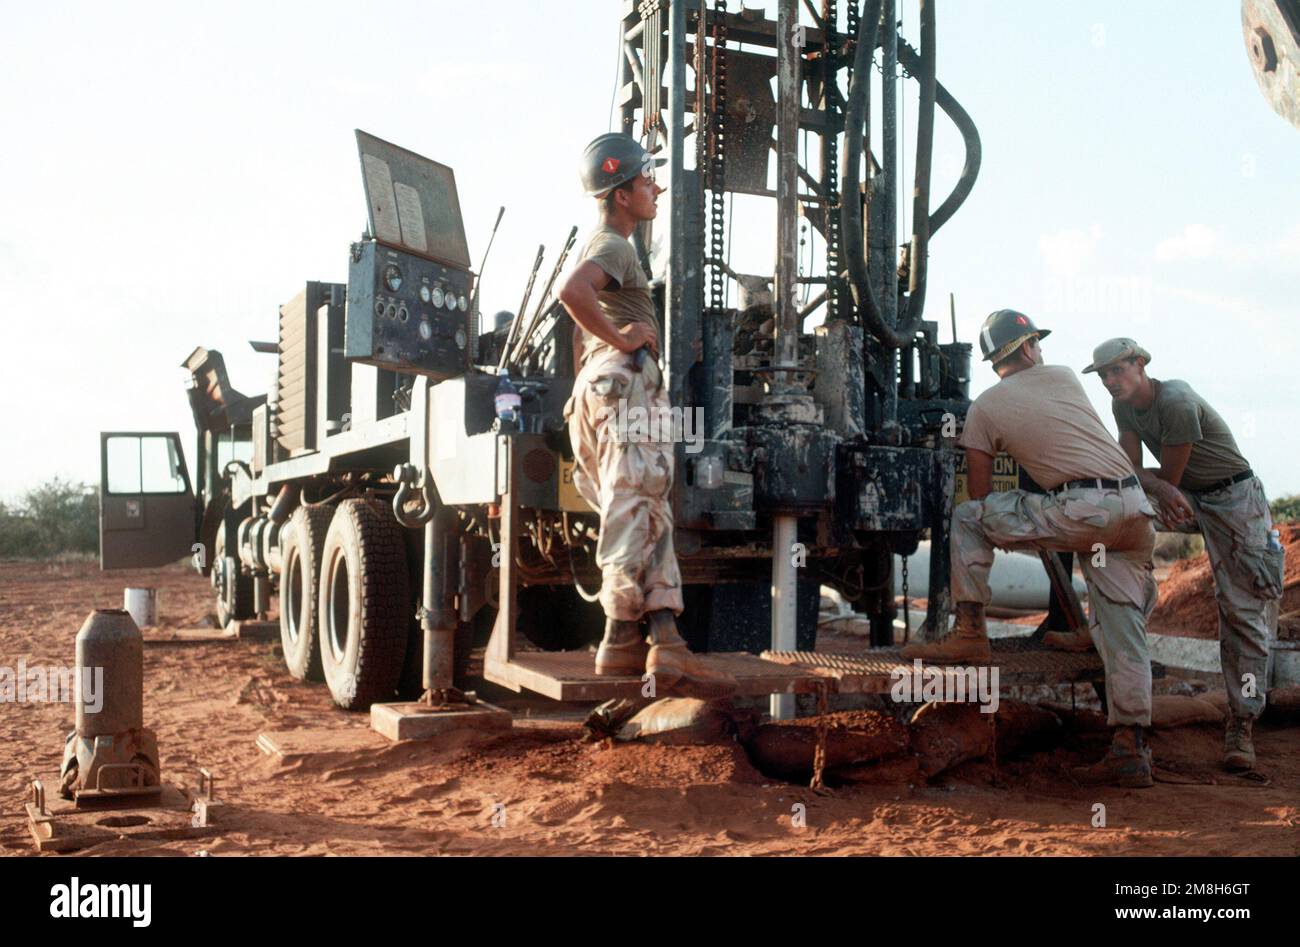 Members of Naval Mobile Construction Battalion 1 (NMCB-1) take a break while working on a mobile drilling rig being used to drill a water well. The well, near Bale Dogle, is intended to supply an old Soviet air base being used by U.S. and Moroccan personnel participating in the operation. Subject Operation/Series: RESTORE HOPE Country: Somalia (SOM) Stock Photo